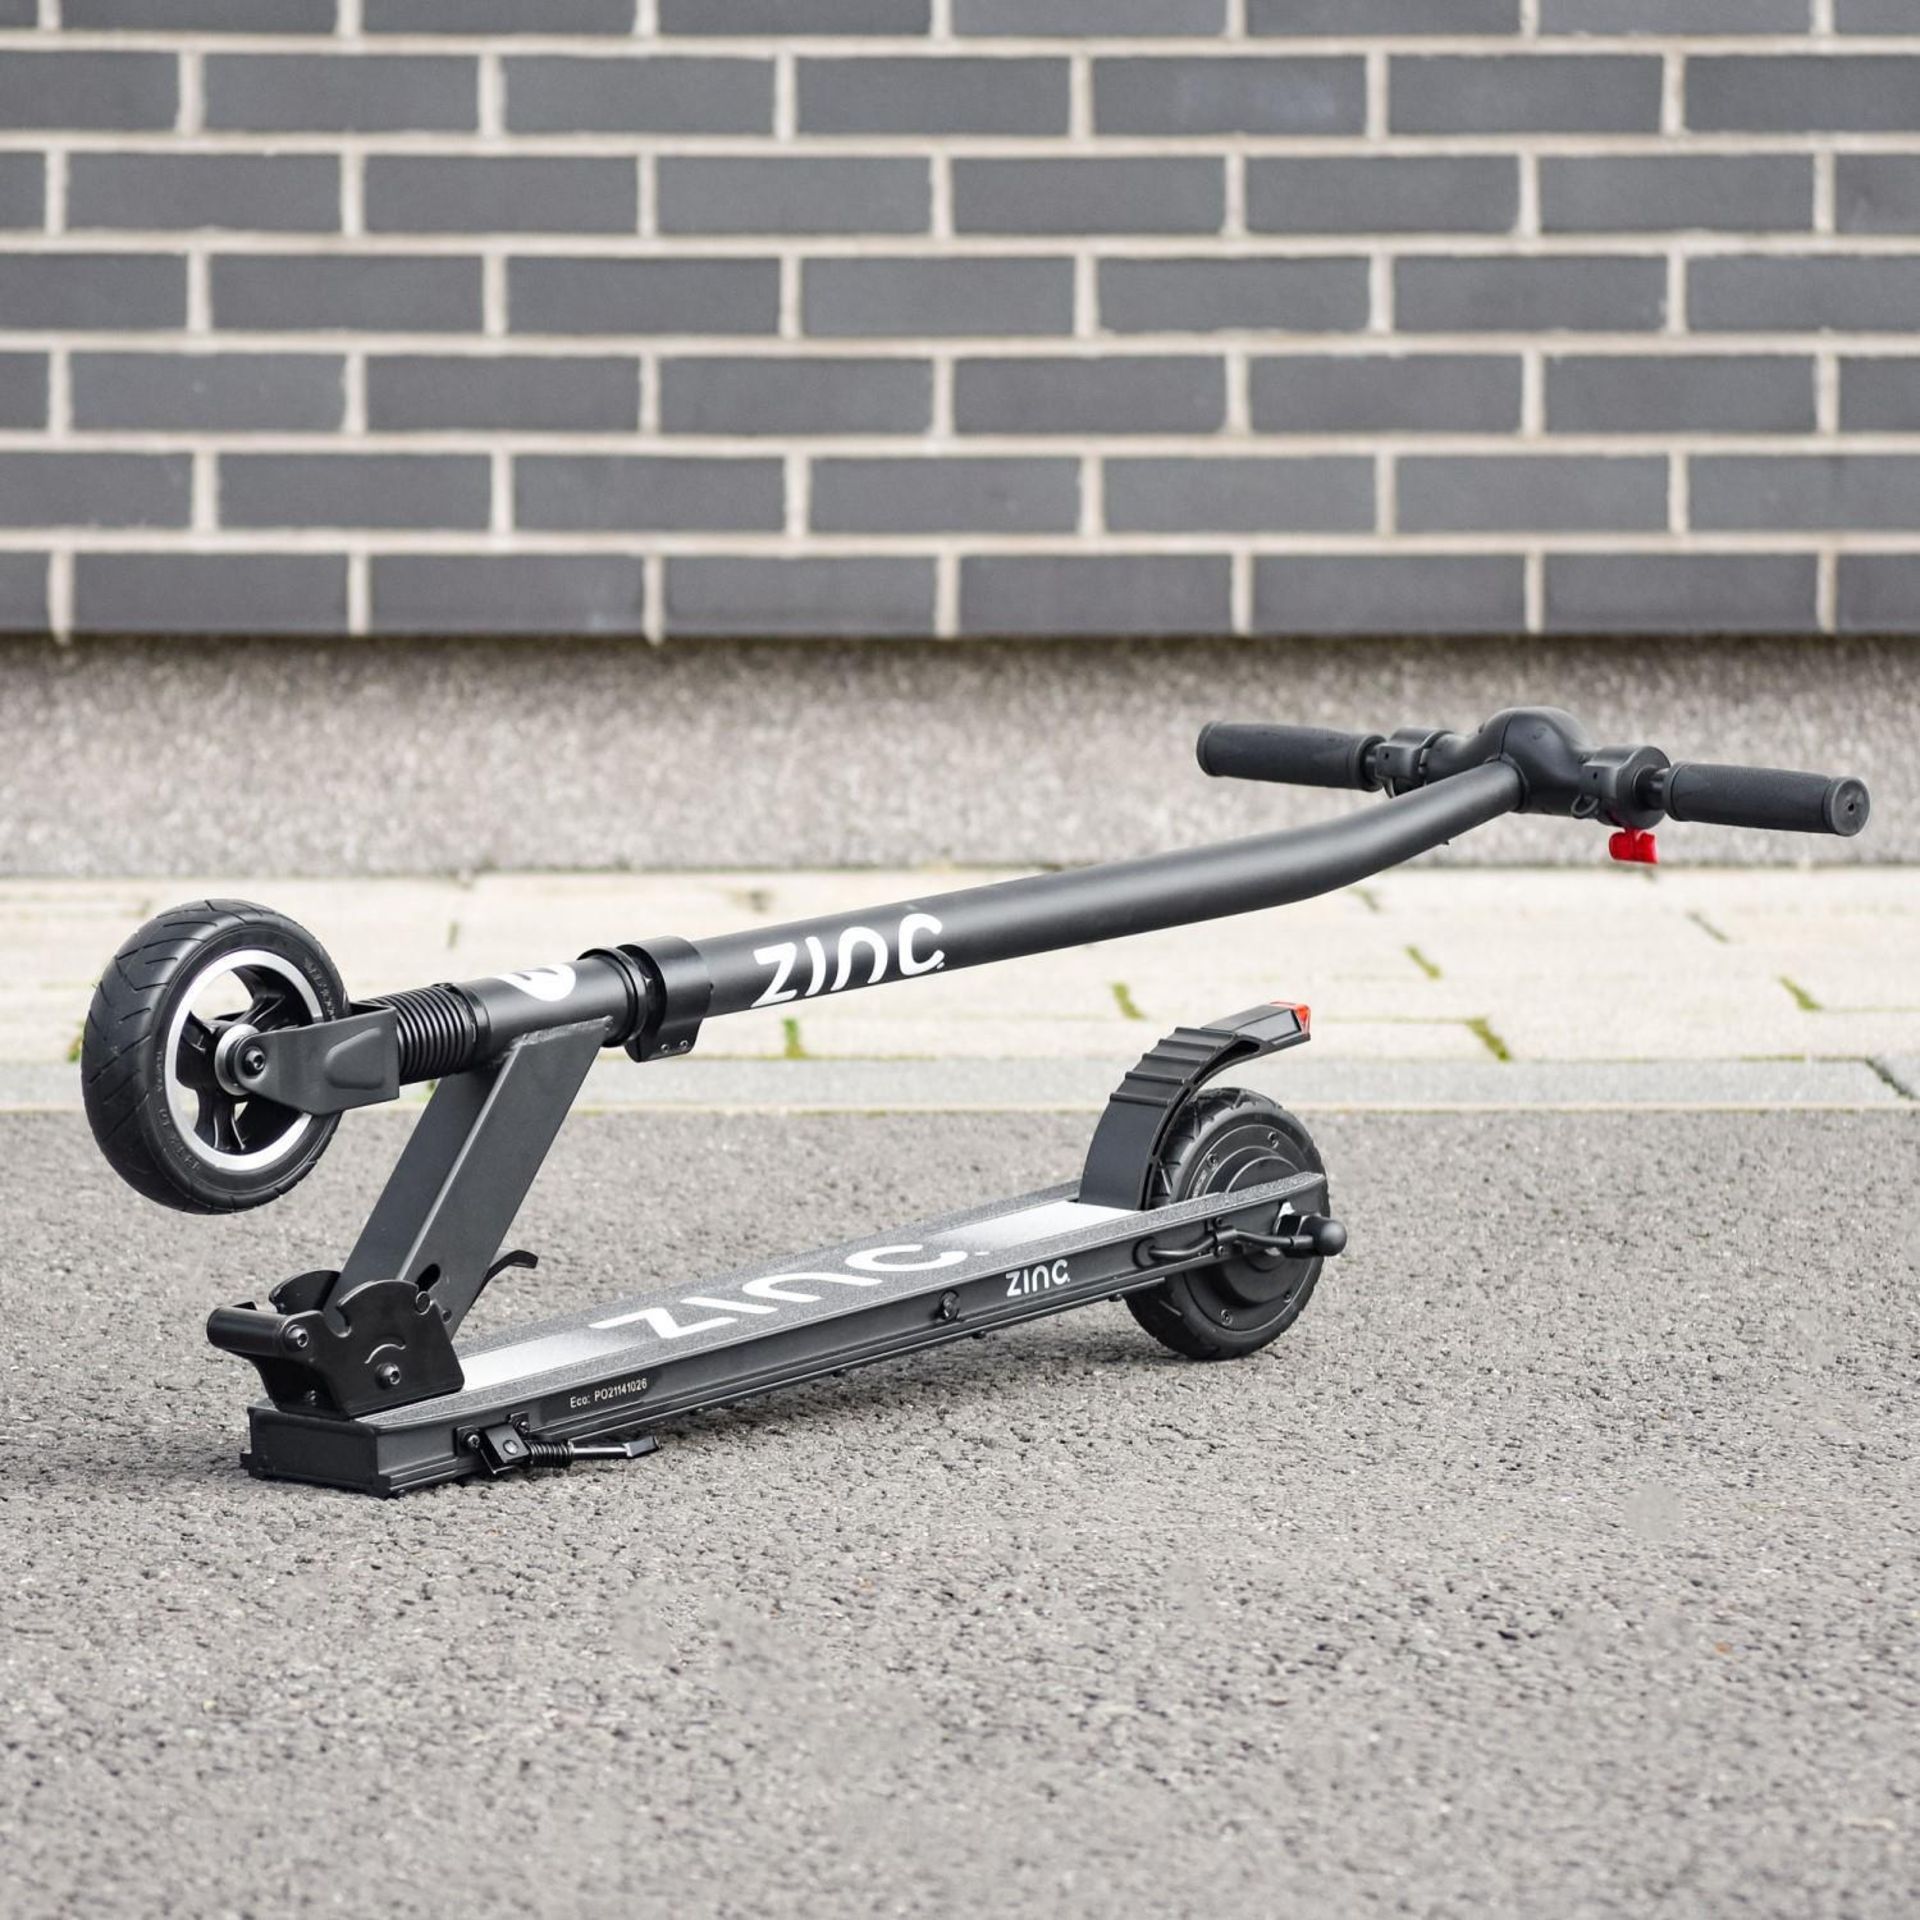 Zinc Eco Electric Scooter Gen 2. RRP £289.99 There’s so much fun to be had with the new ECO - Image 2 of 2